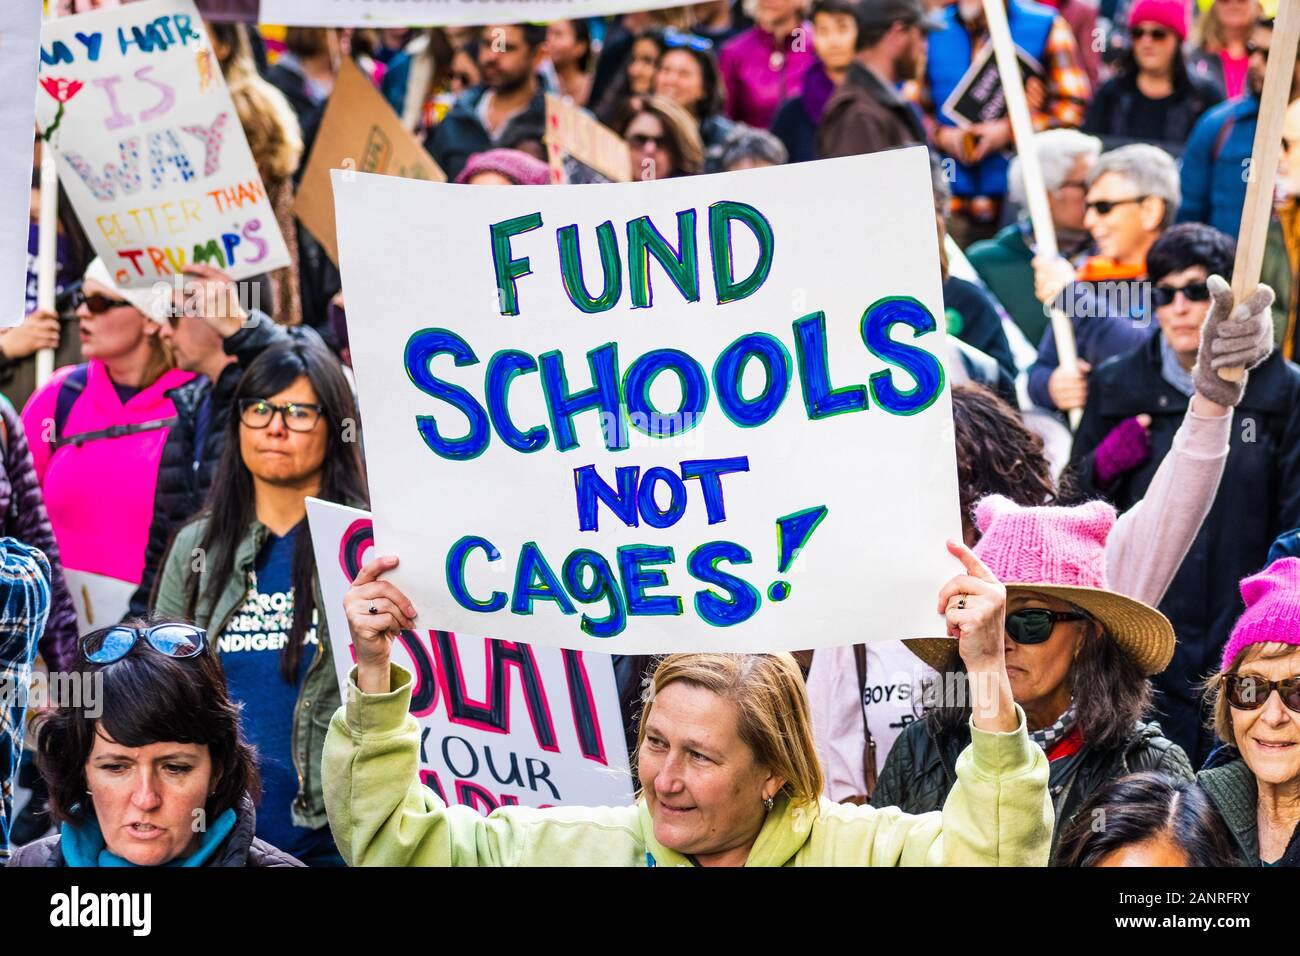 Jan 18, 2020 San Francisco / CA / USA - Participant to the Women's March event holds 'Fund Schools Not Cages' sign while marching on Market street in Stock Photo